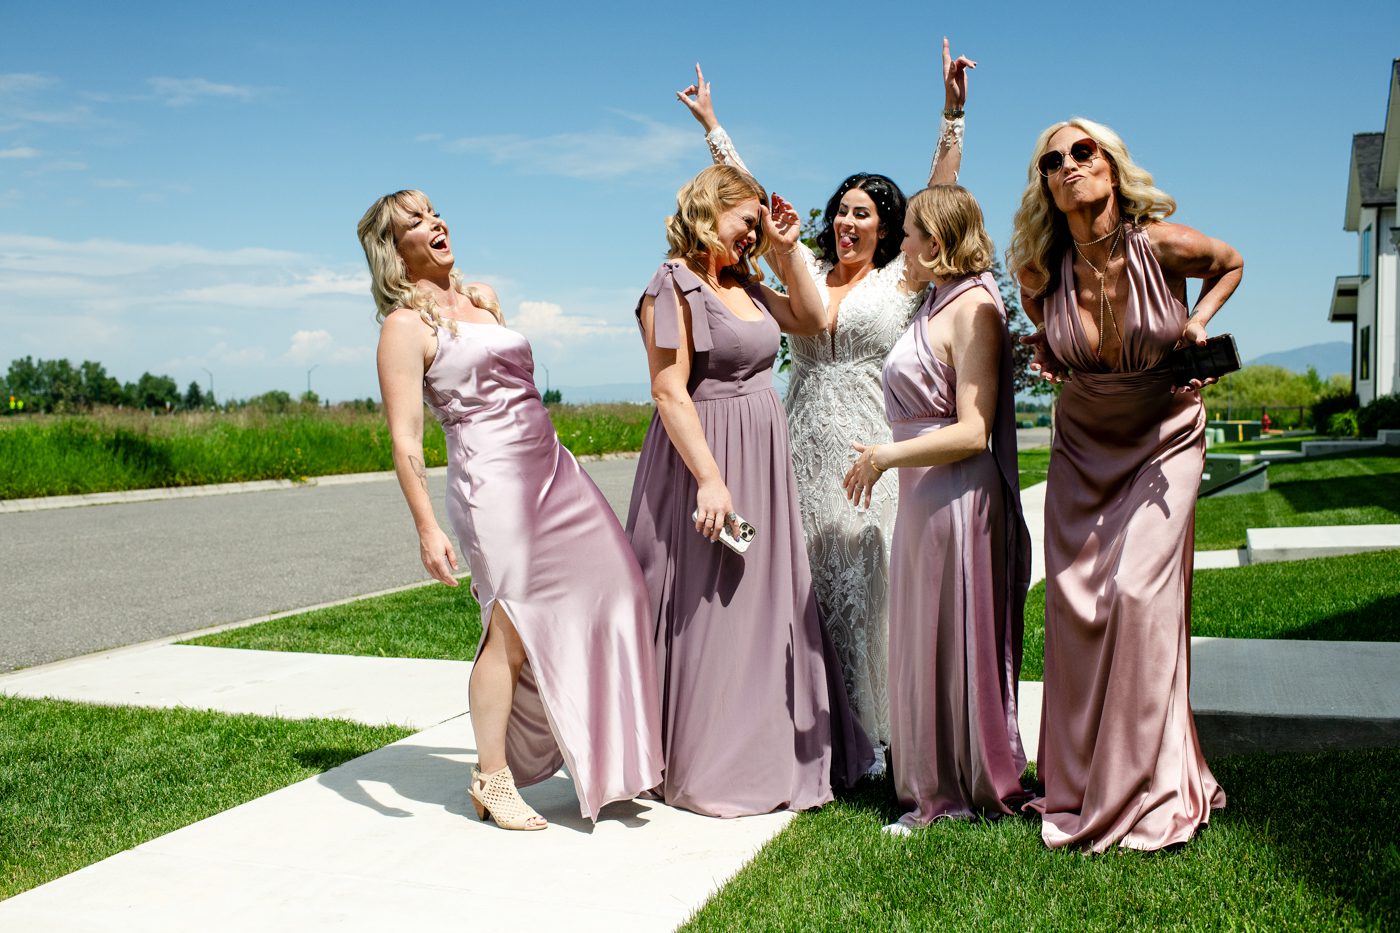 bride-with-bridesmaids-get-silly-before-wedding-ceremony